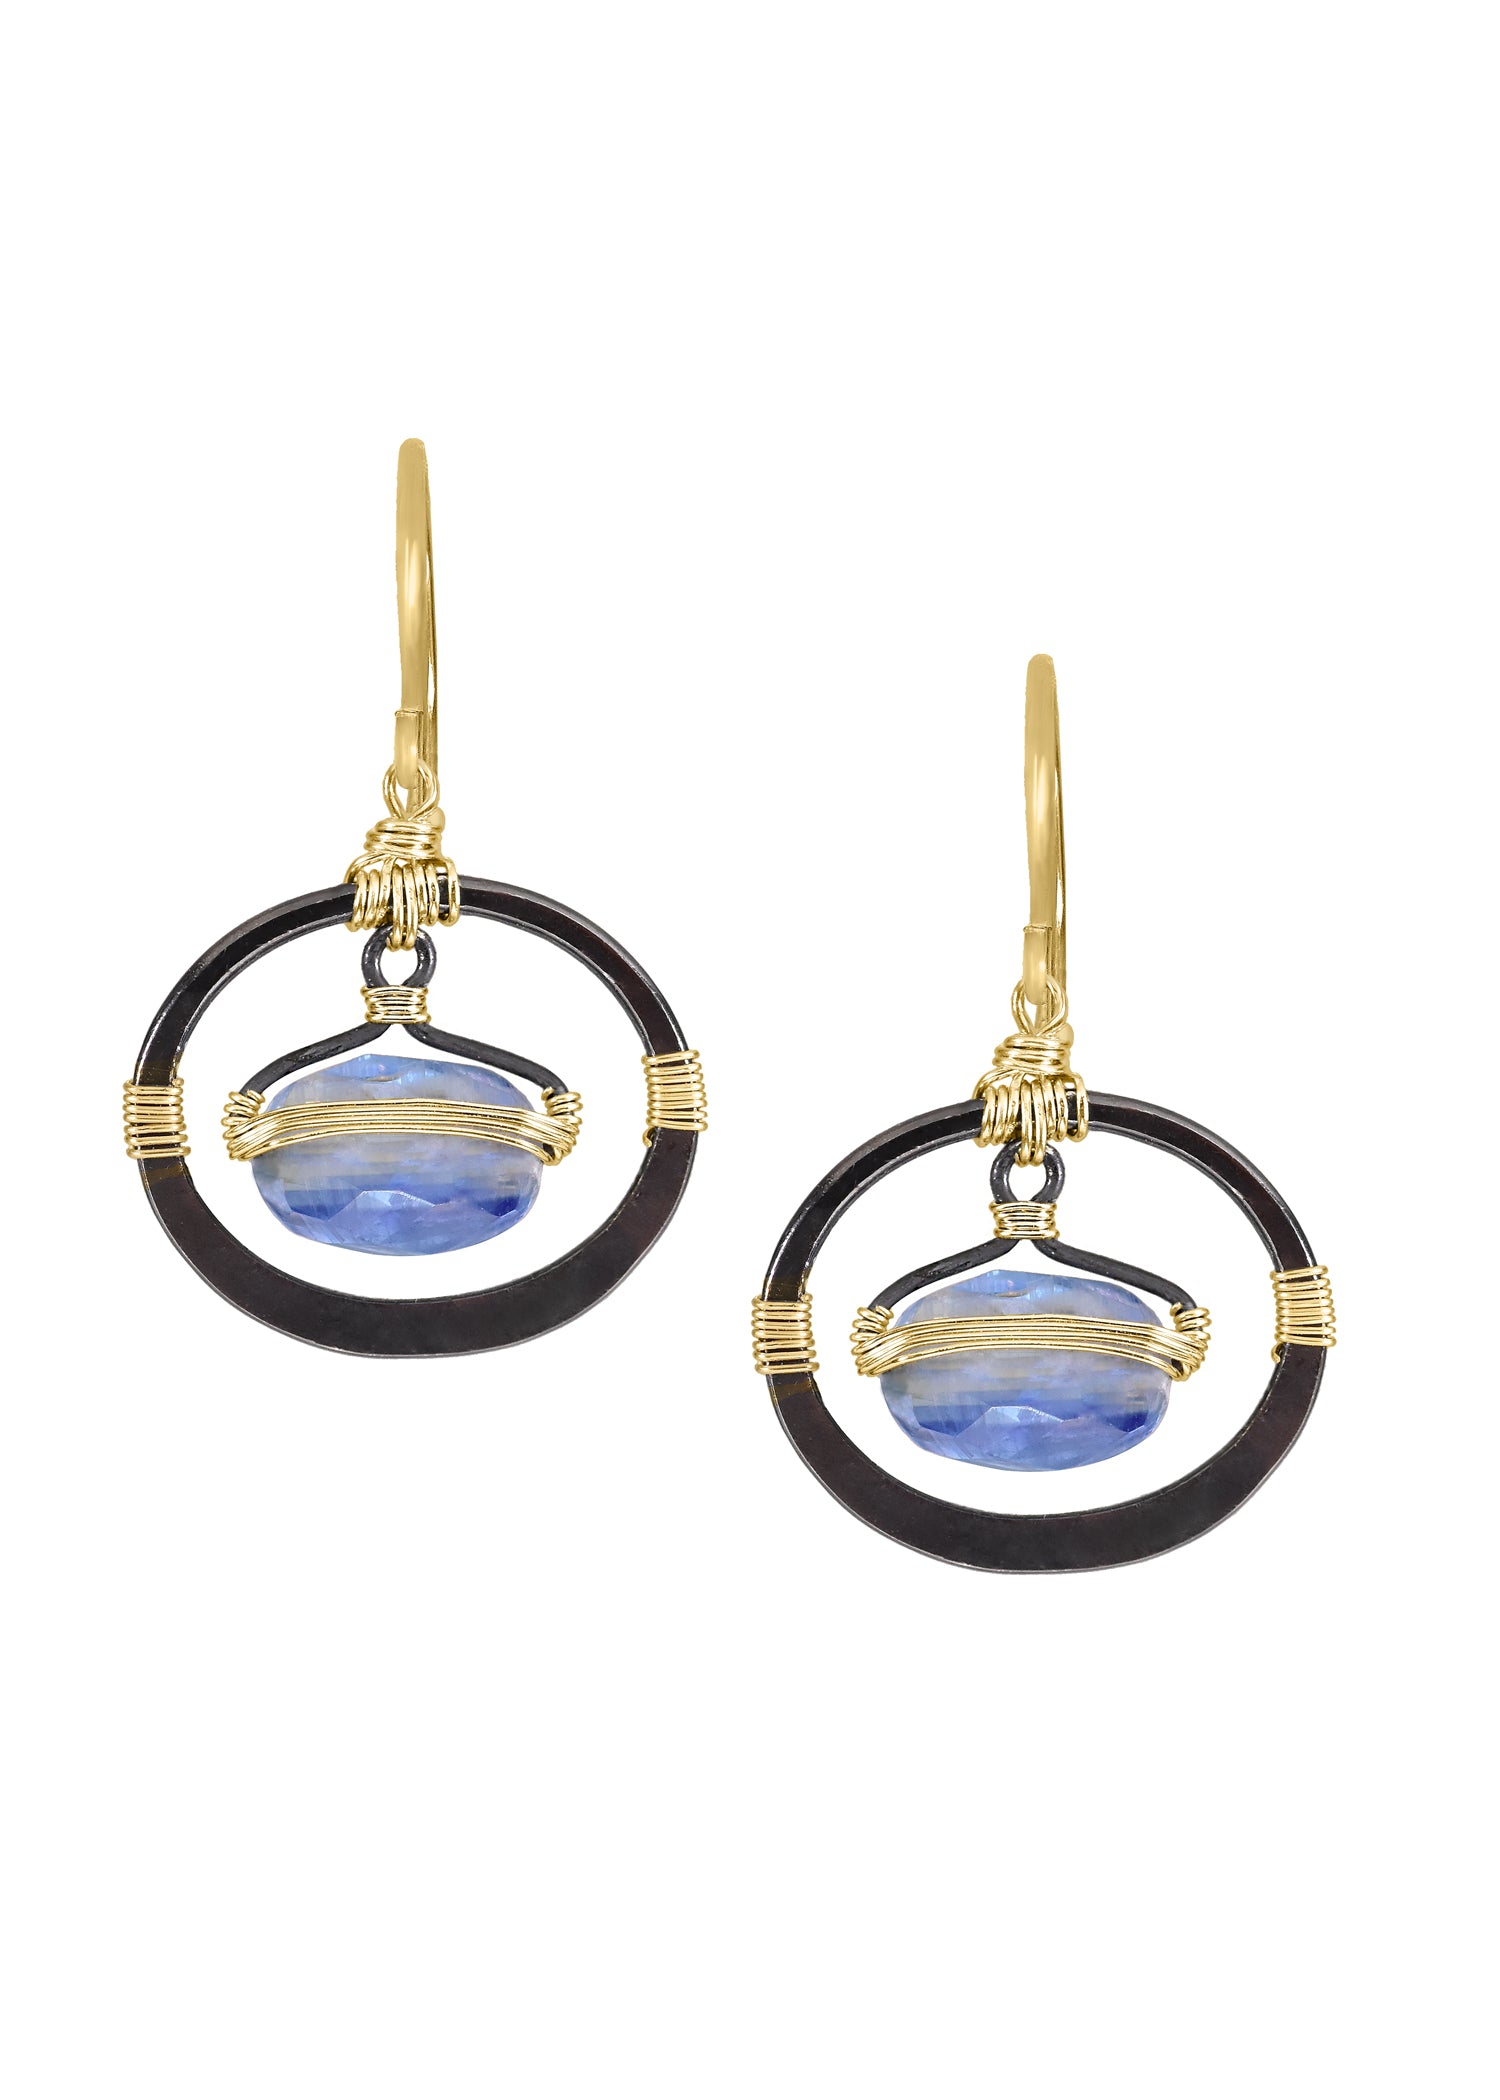 Kyanite 14k gold fill Blackened silver Mixed metal Earrings measure 1" in length (including the ear wires) and 5/8" in width at the widest point Handmade in our Los Angeles studio